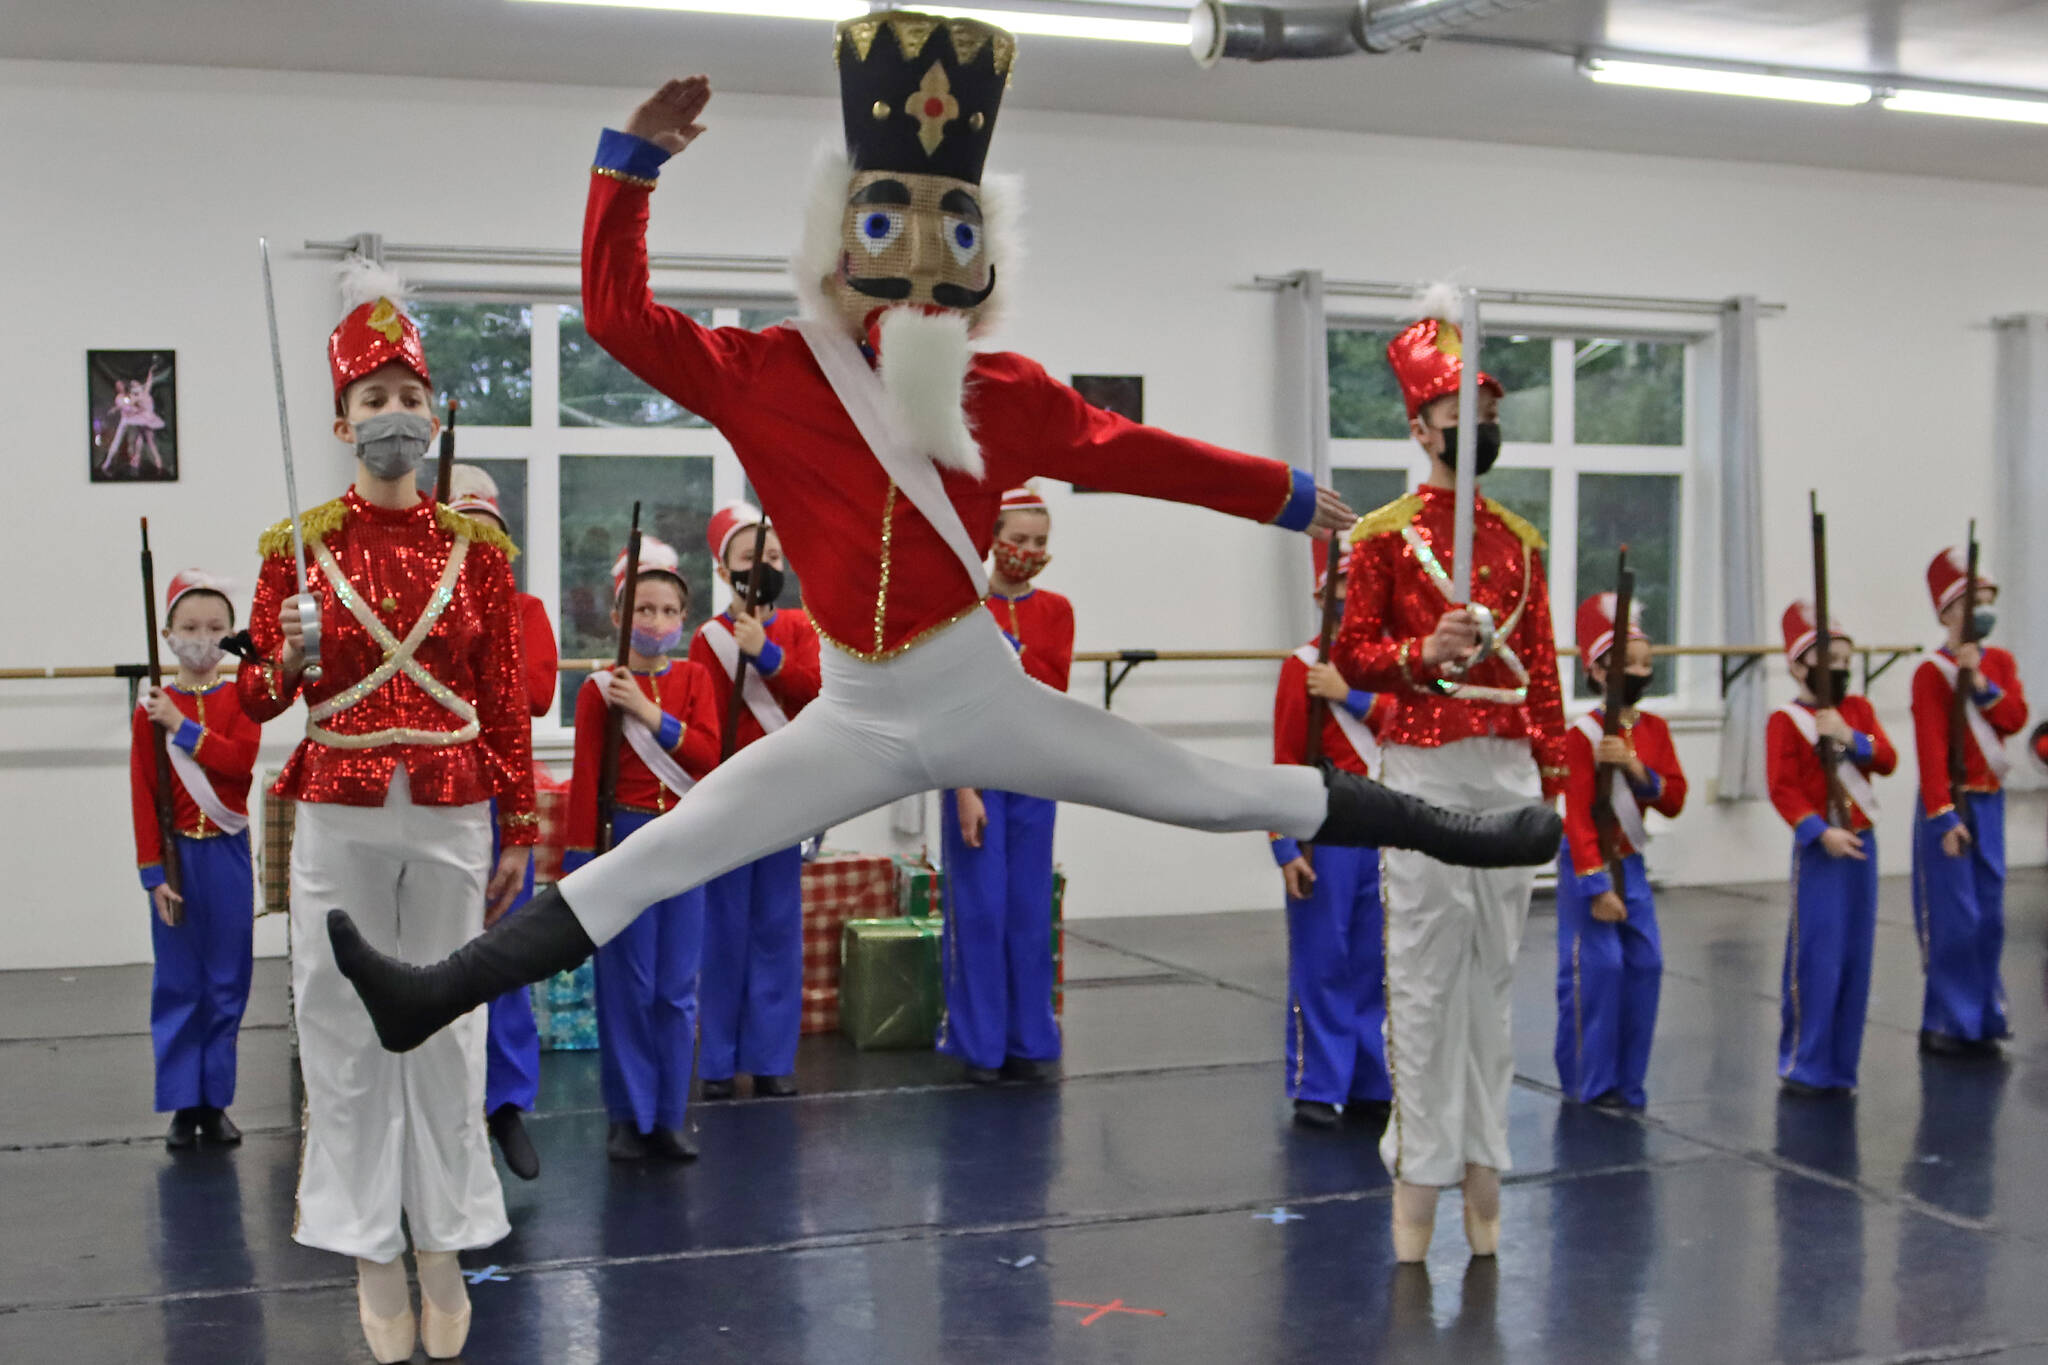 Viktor Bell rehearses his role in “The Nutcracker” on Saturday, Nov. 27. Lead soldiers Grace Bultez and Ainsley Mallott stand guard. (Ben Hohenstatt/Juneau Empire)